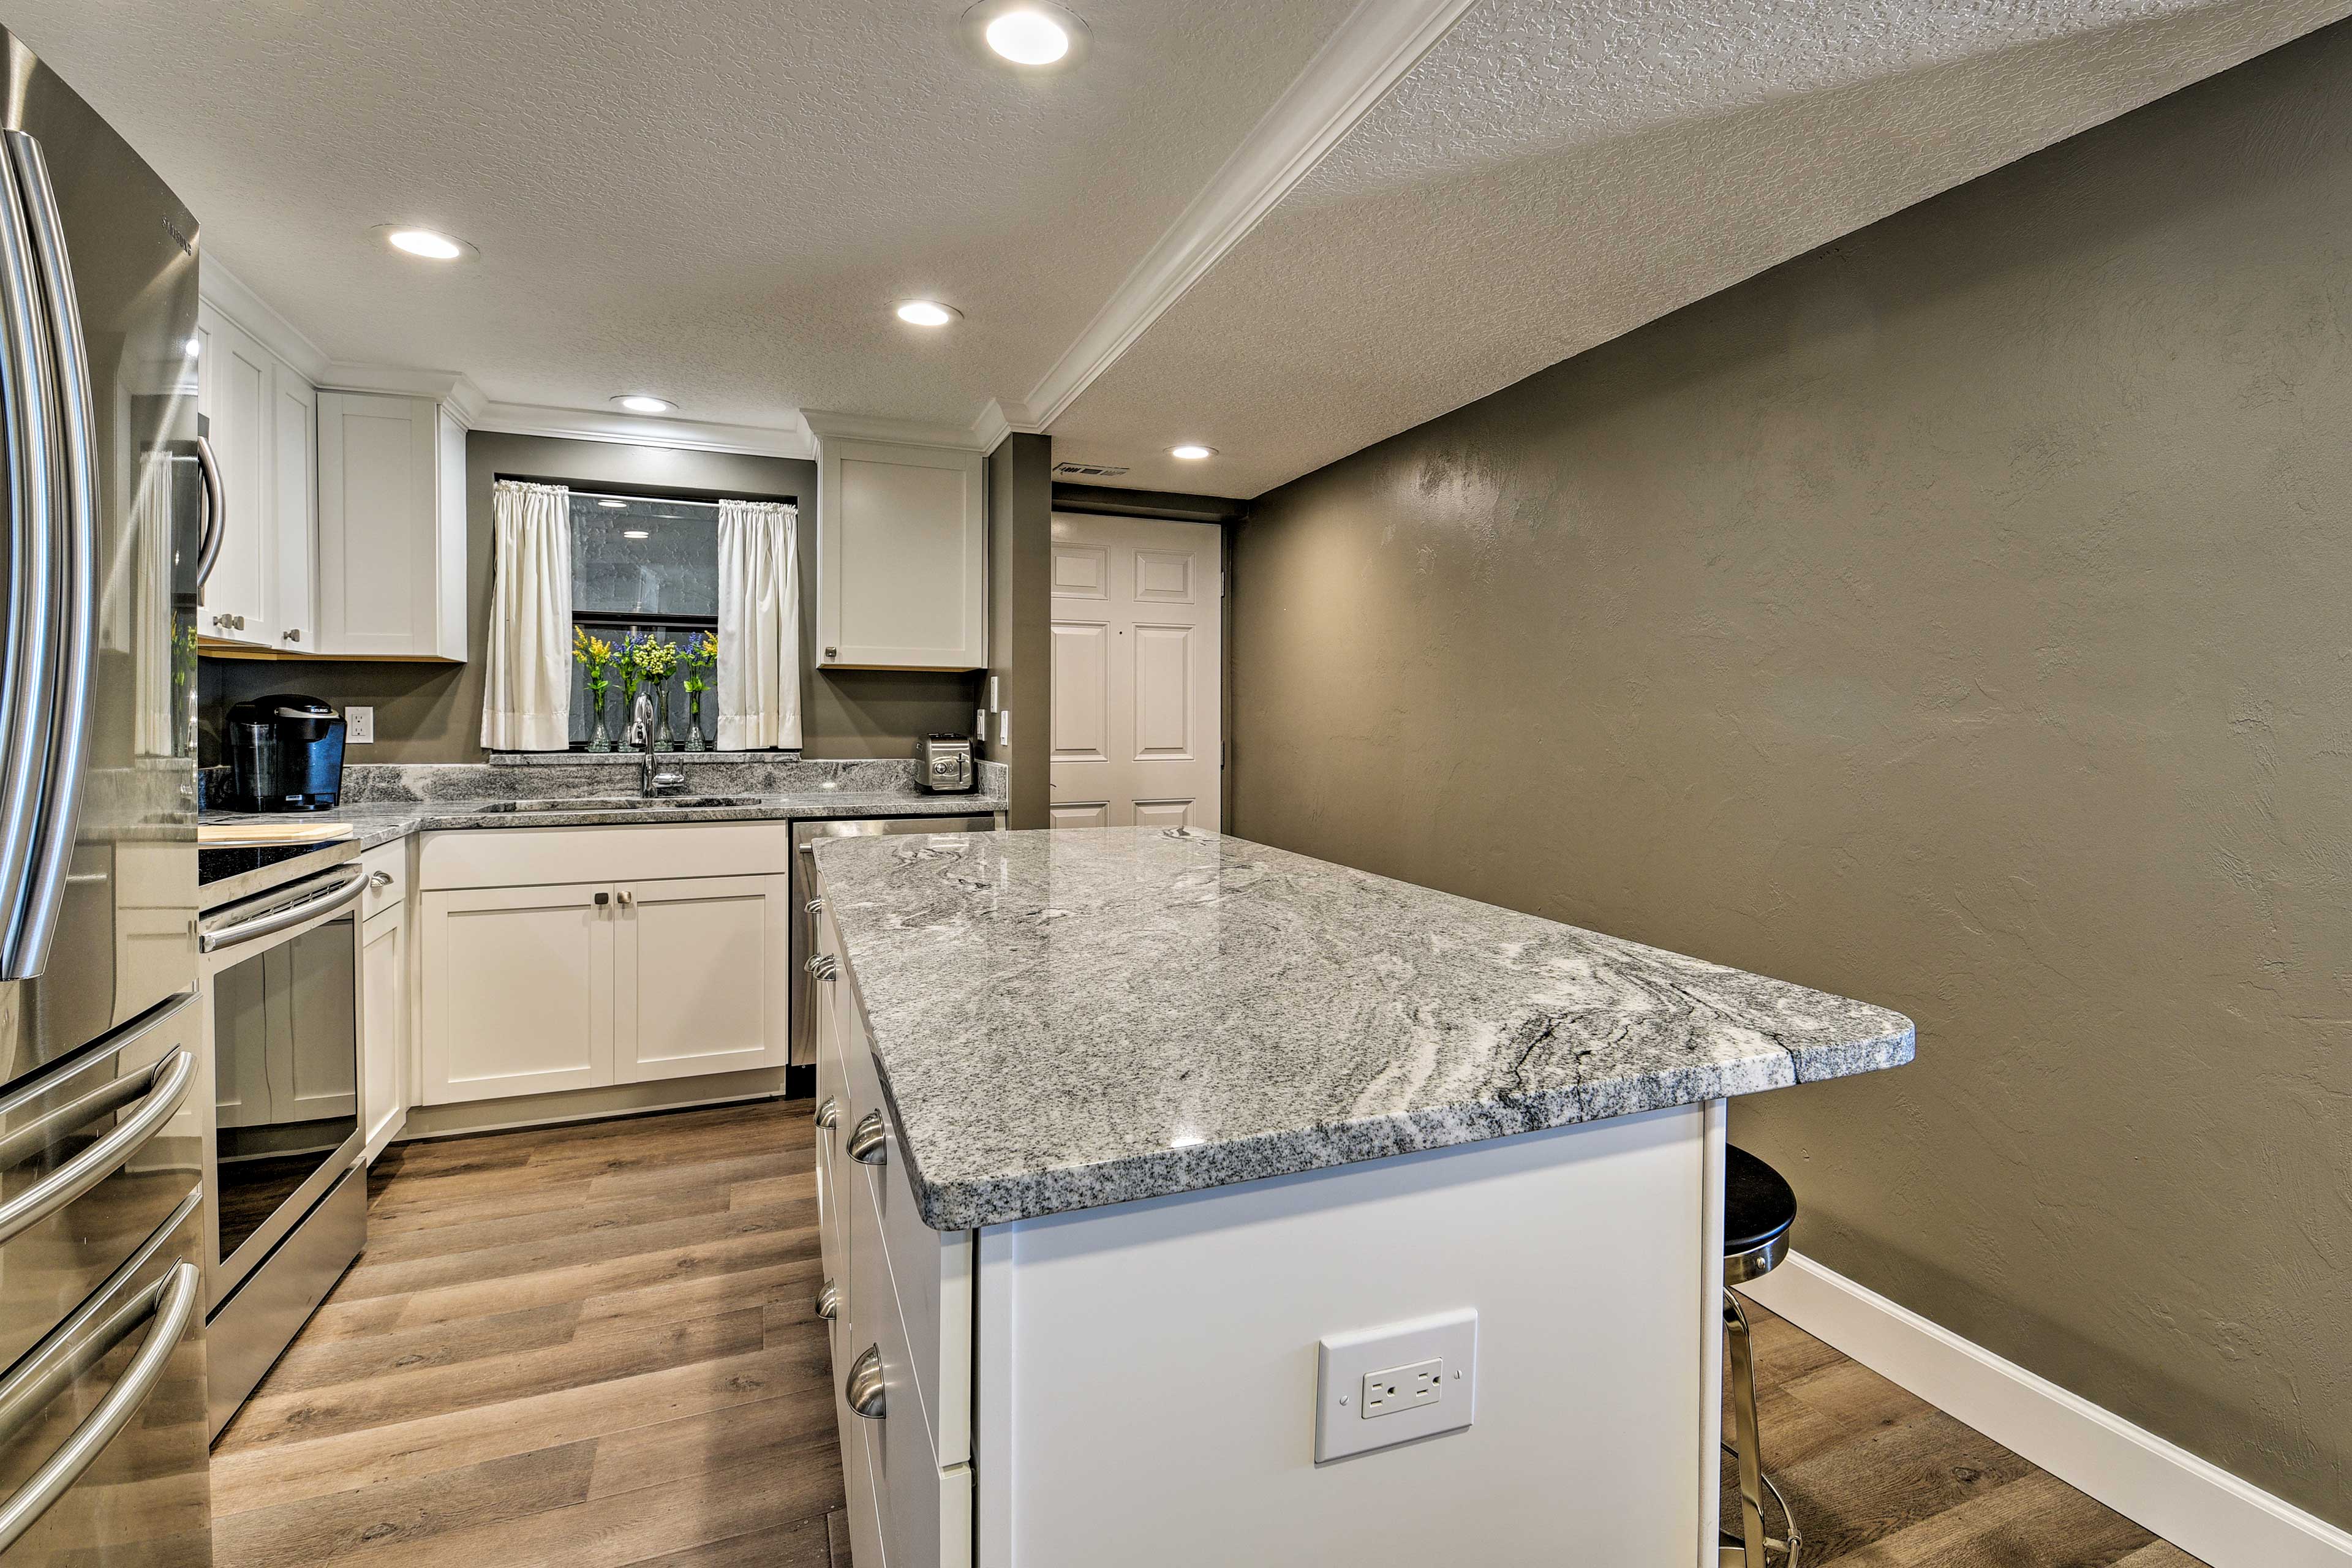 The granite topped counters offer plenty of prep space.